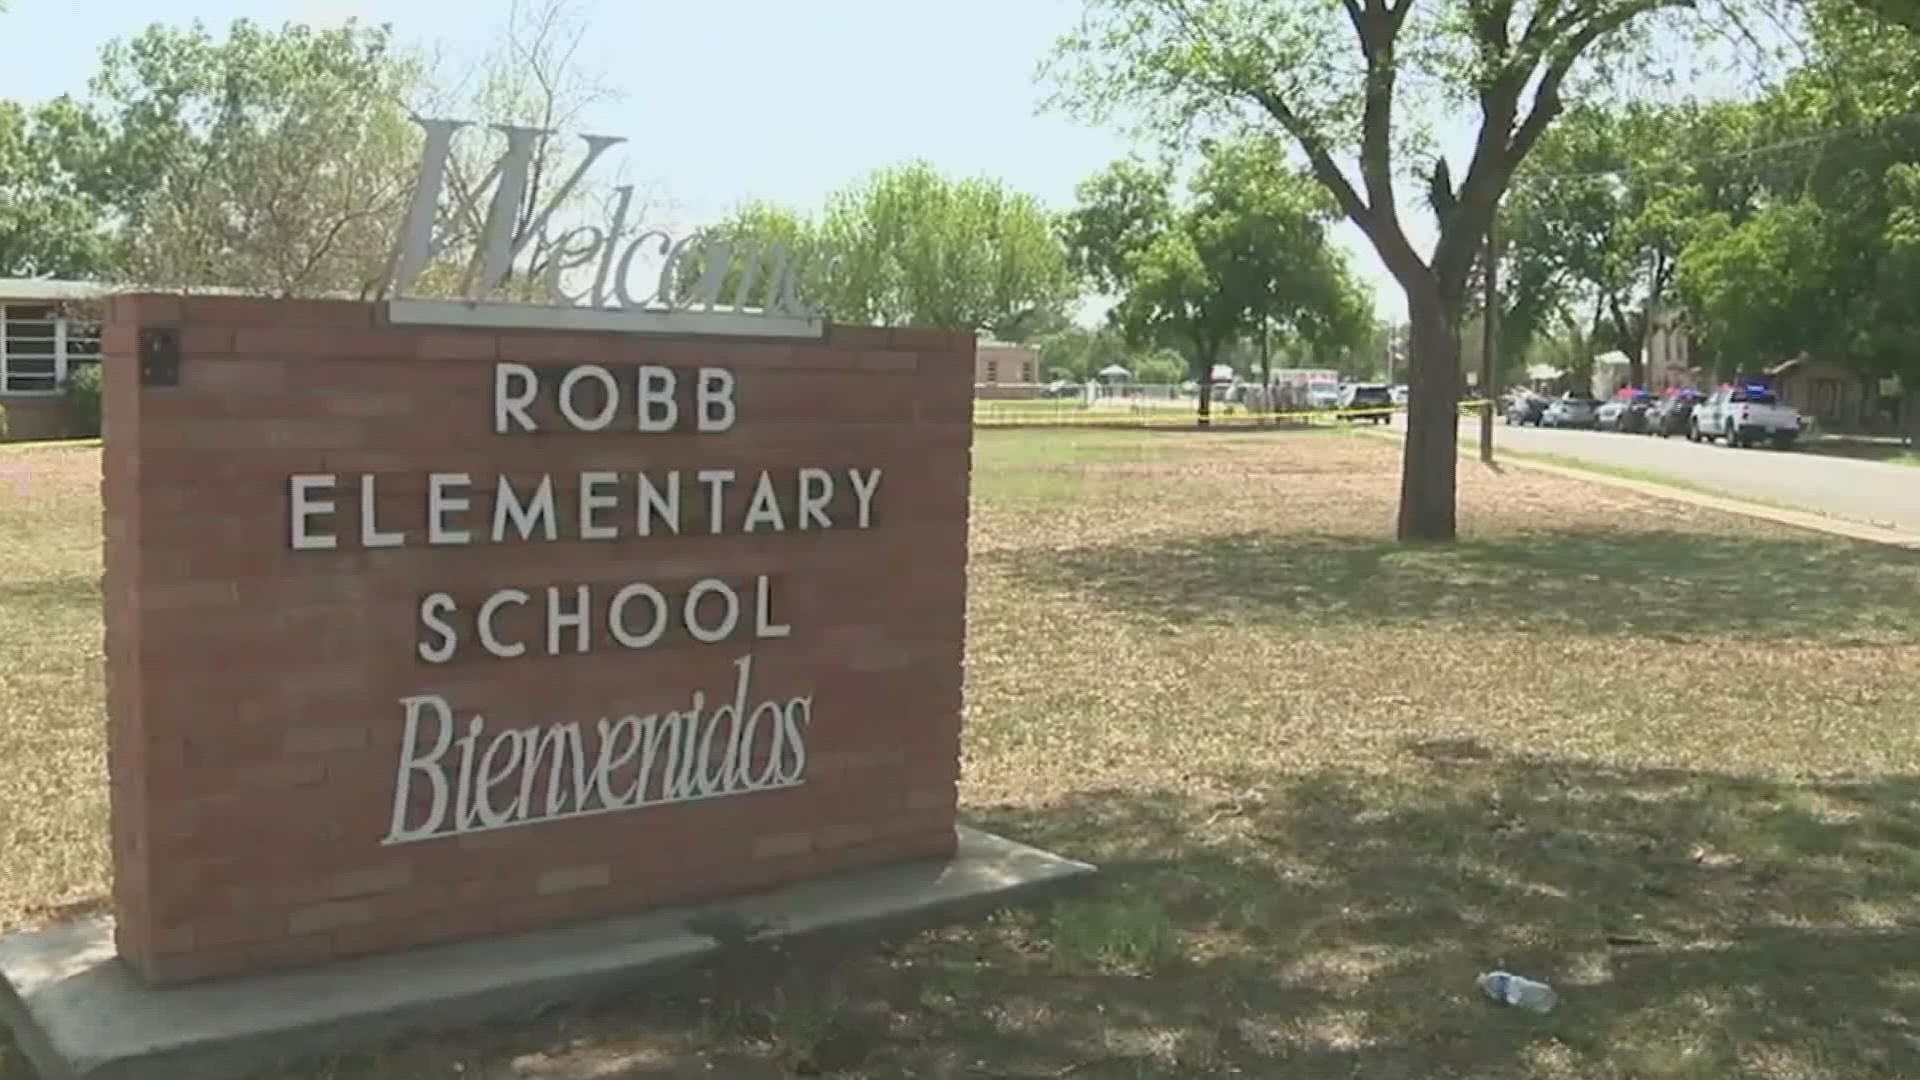 City Officials are requesting crucial information regarding the shooting at Robb Elementary.